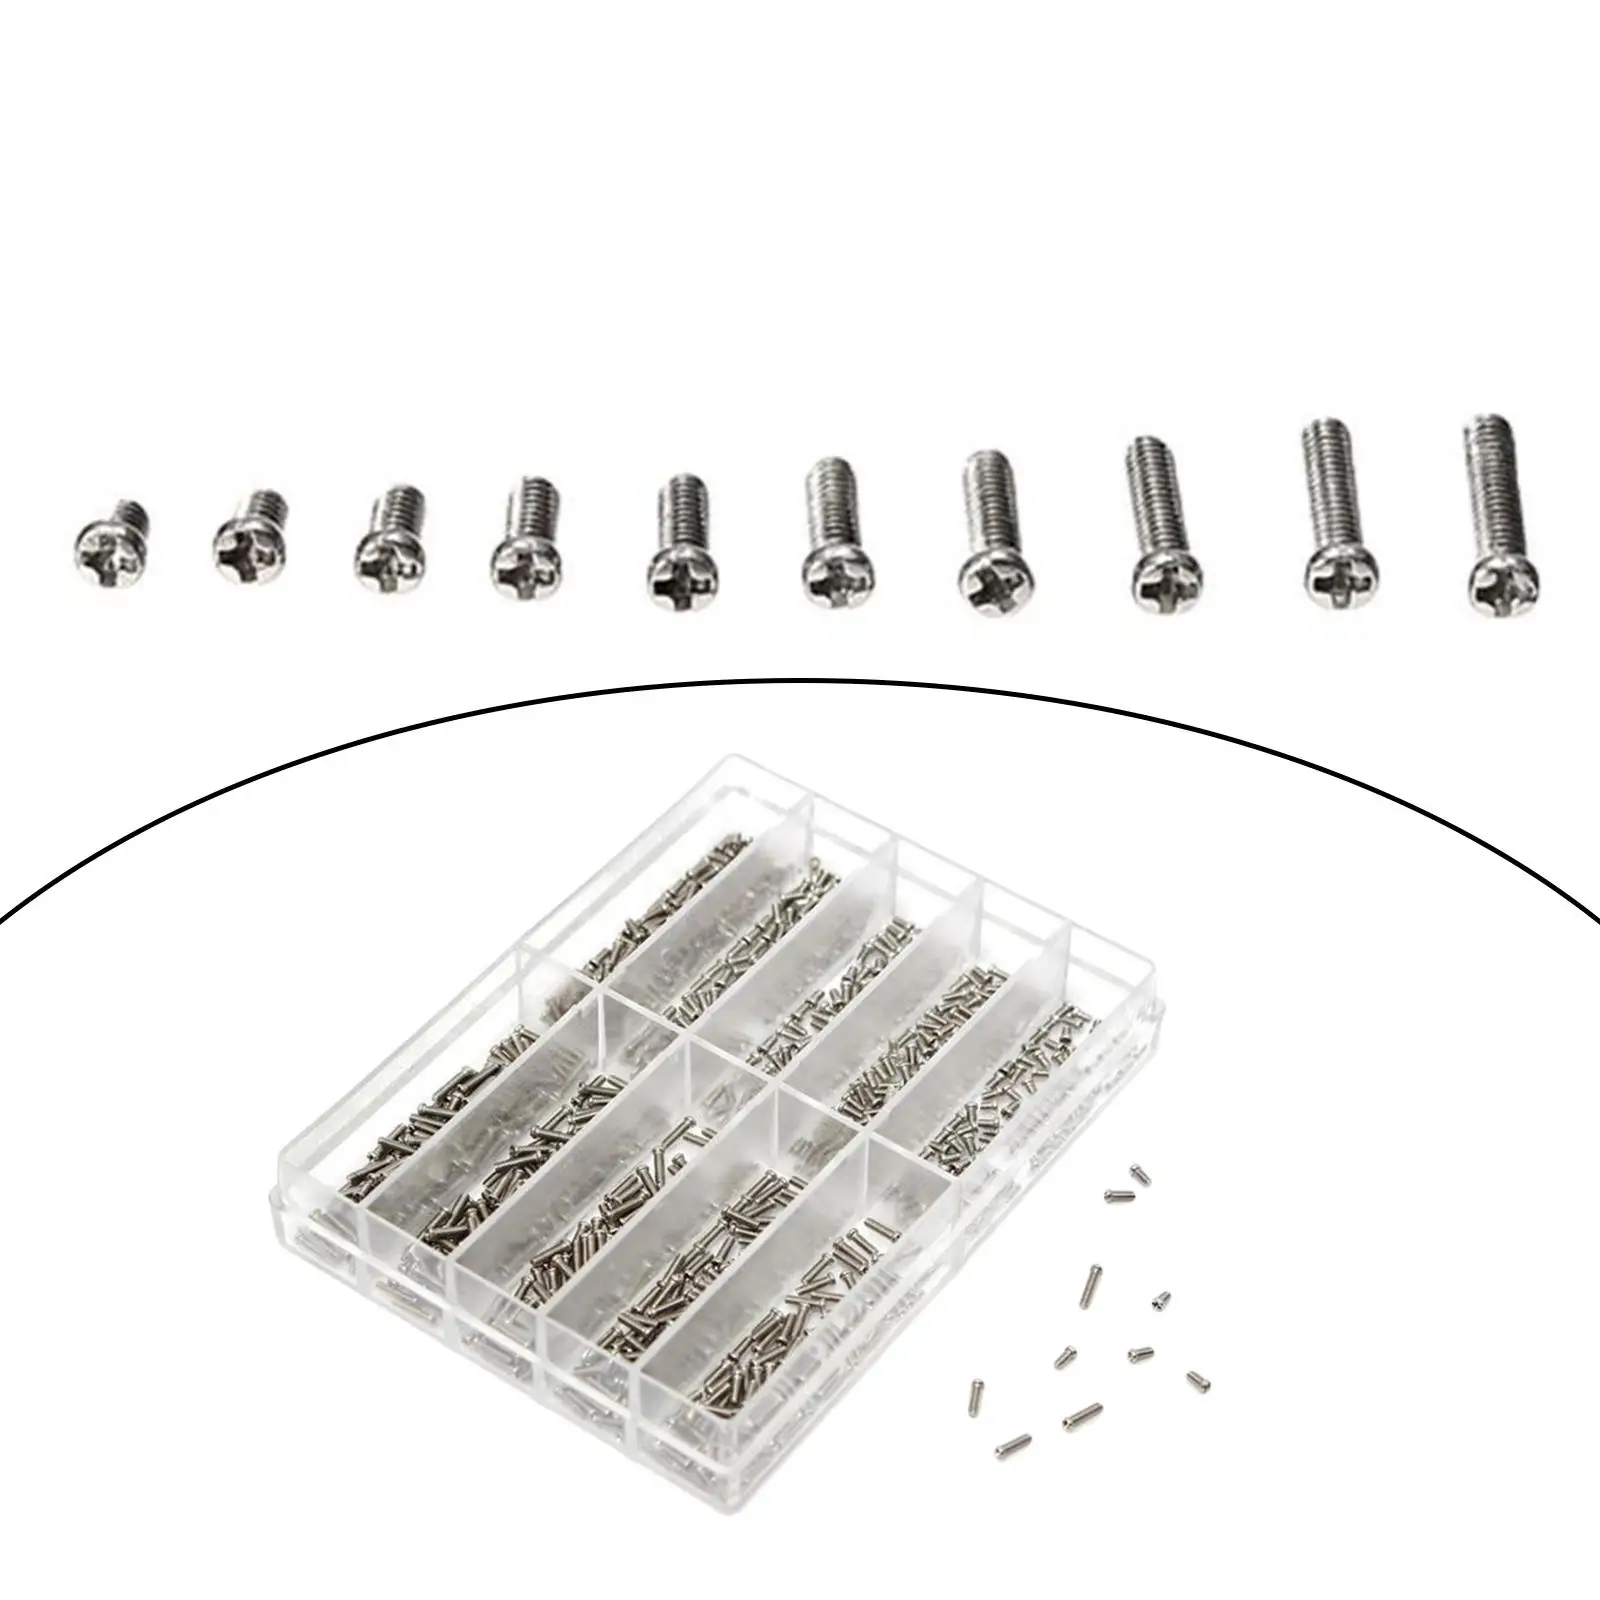 500PCS Cover Screw 1.6mm-6.0mm Assortment Size Stainless Steel, 10 Different Sizes, High Performance